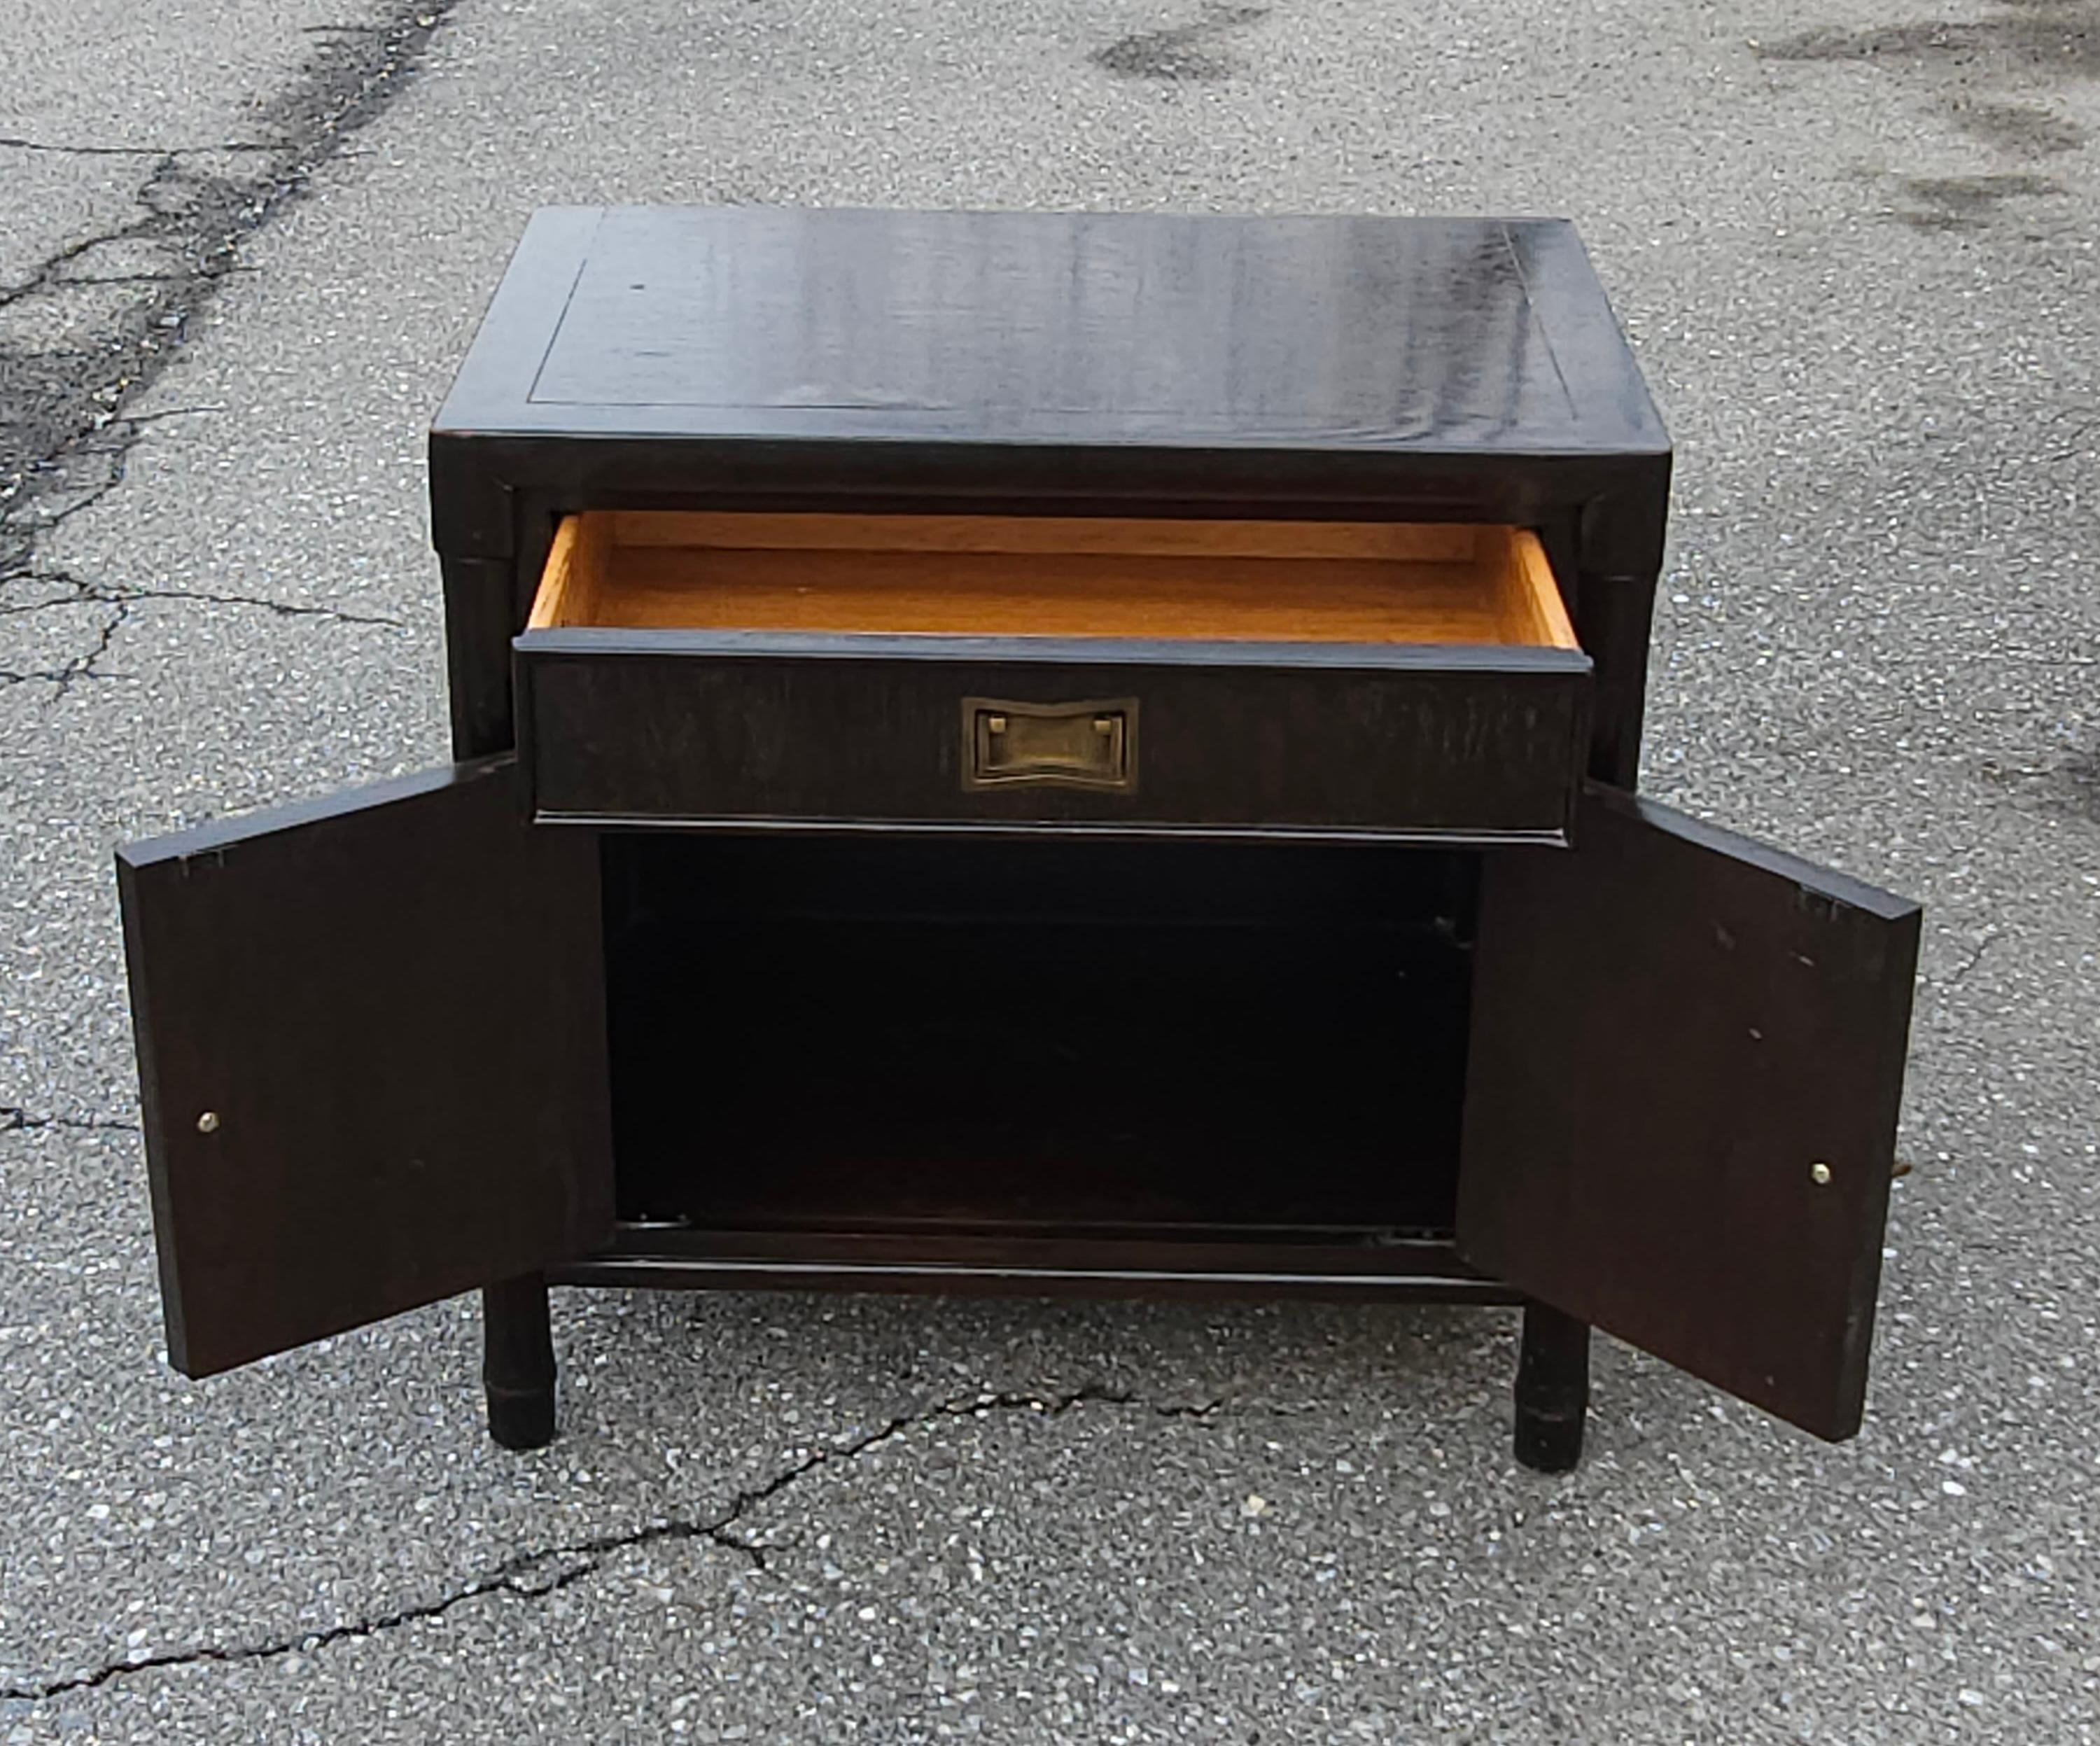 A late 20th Century Century Furniture Chin Hua Collection Ebonized Mahogany Bedside Table in great vintage condition.
Measures 25